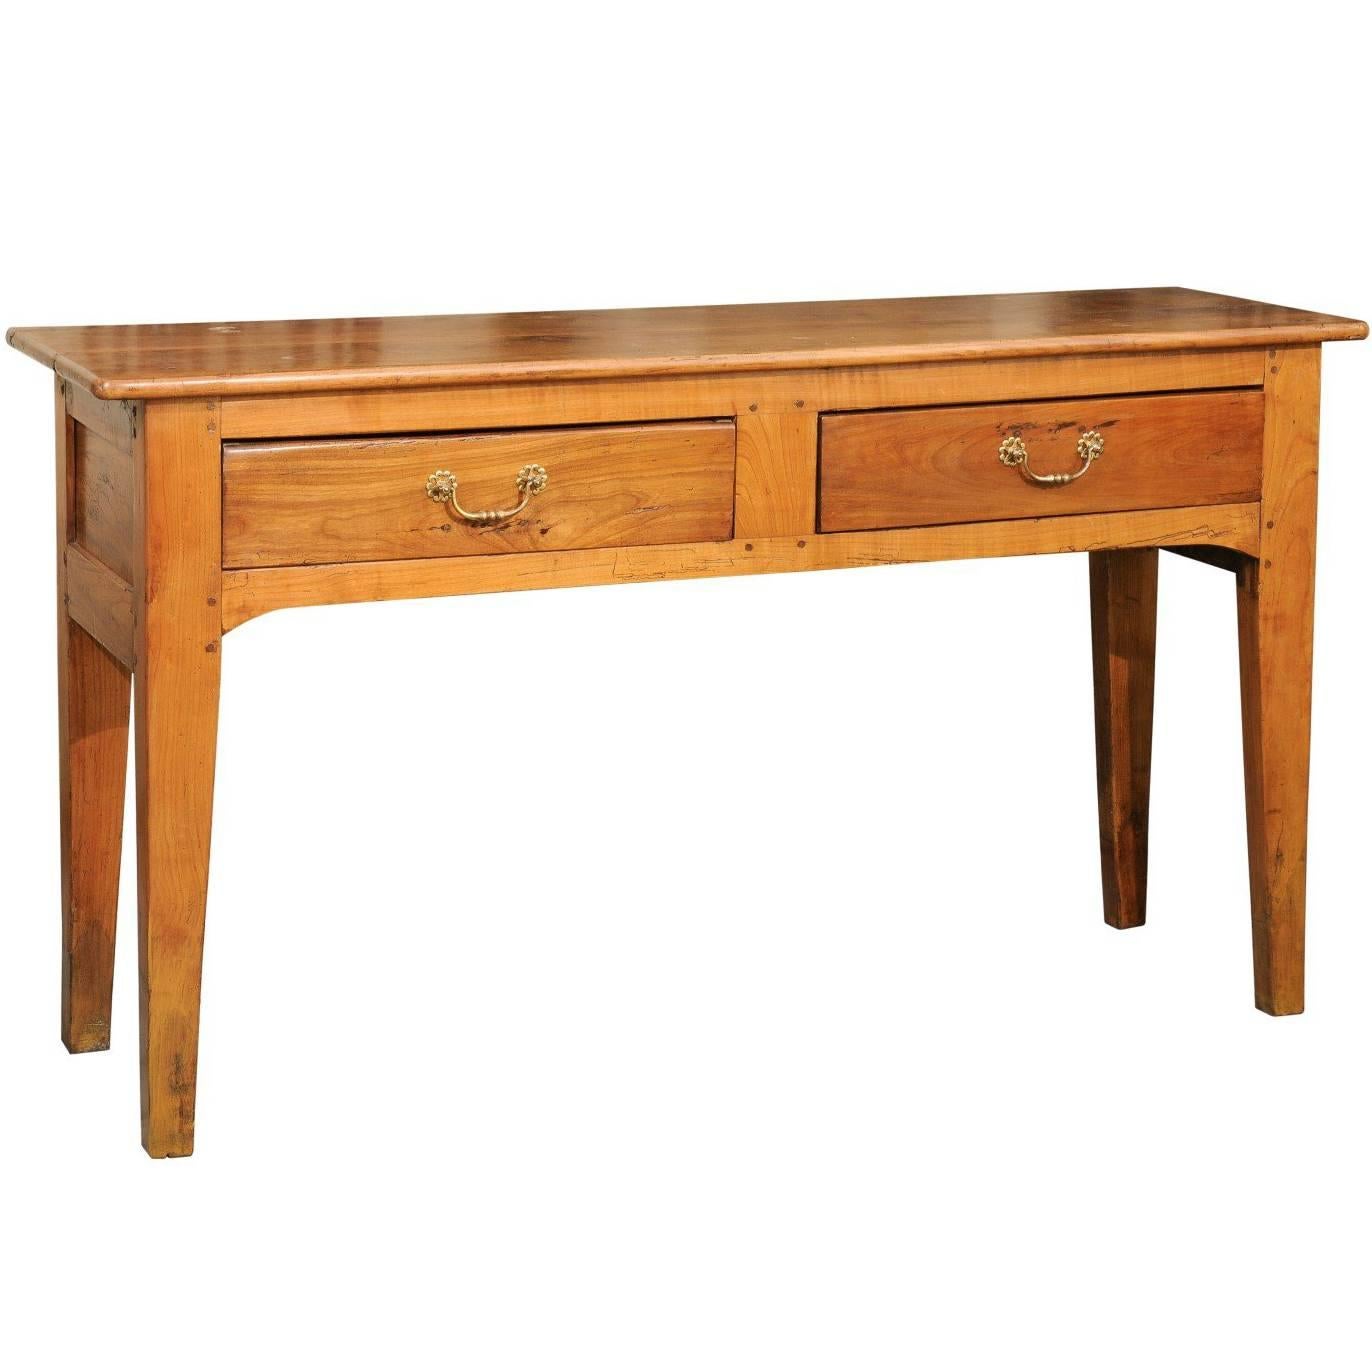 Late 19th Century French Fruitwood Server with Two Drawers and Tapered Legs For Sale